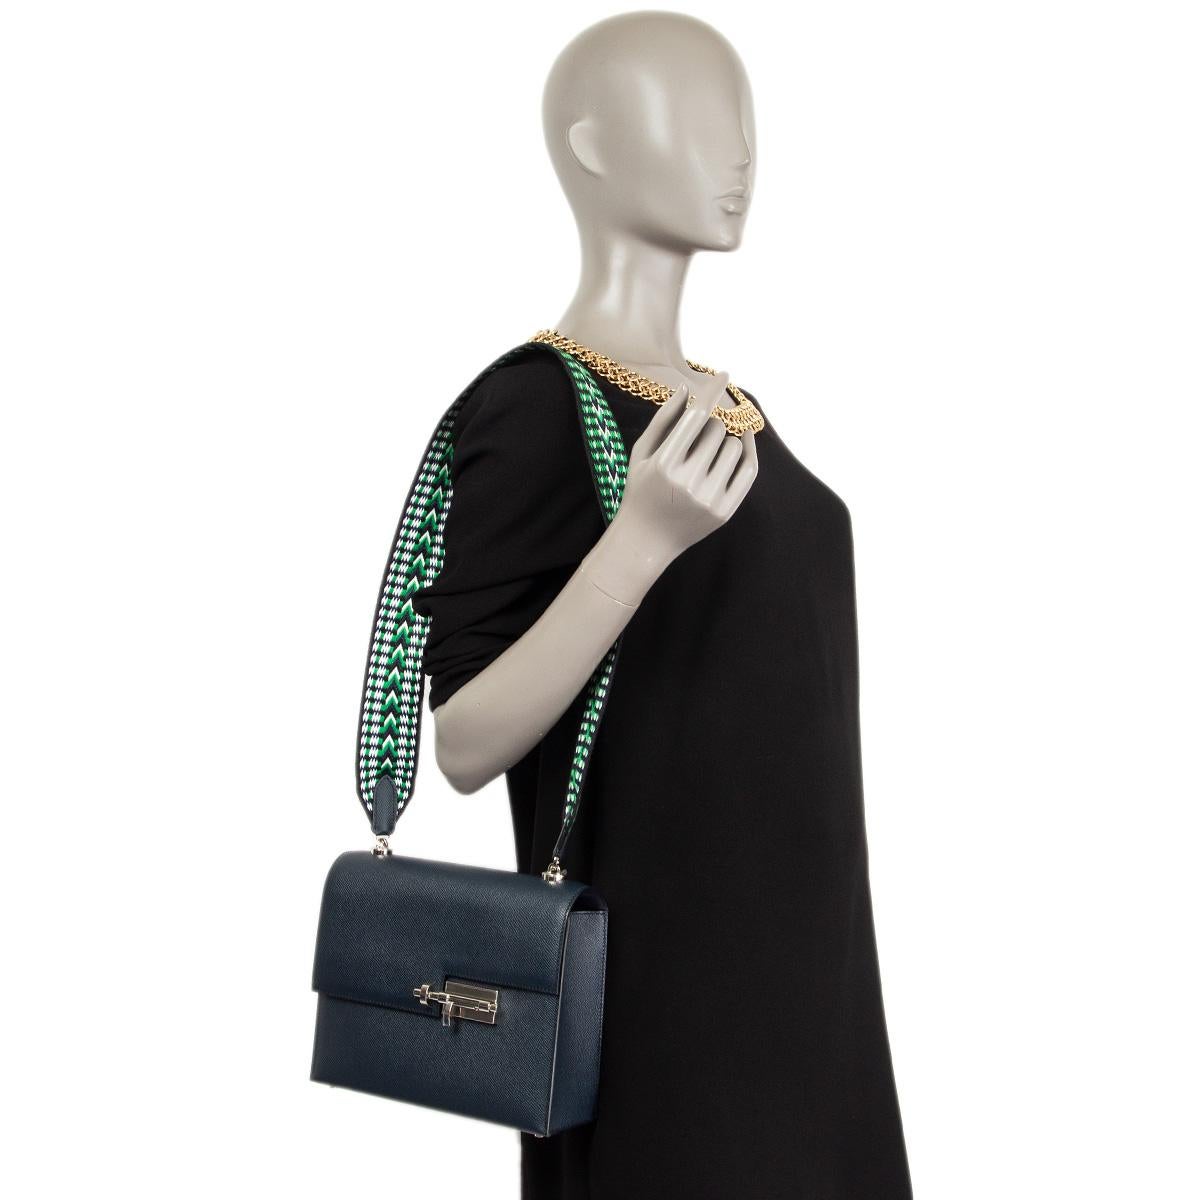 100% authentic Hermès Verrou 21 large shoulder bag in Bleu Nuit Veau Epsom (calfskin) featuring Palladium silver-tone hardware. Bag opens with a Palladium plated slide lock and comes with a black, green, navy and white canvas shoulder strap. Has